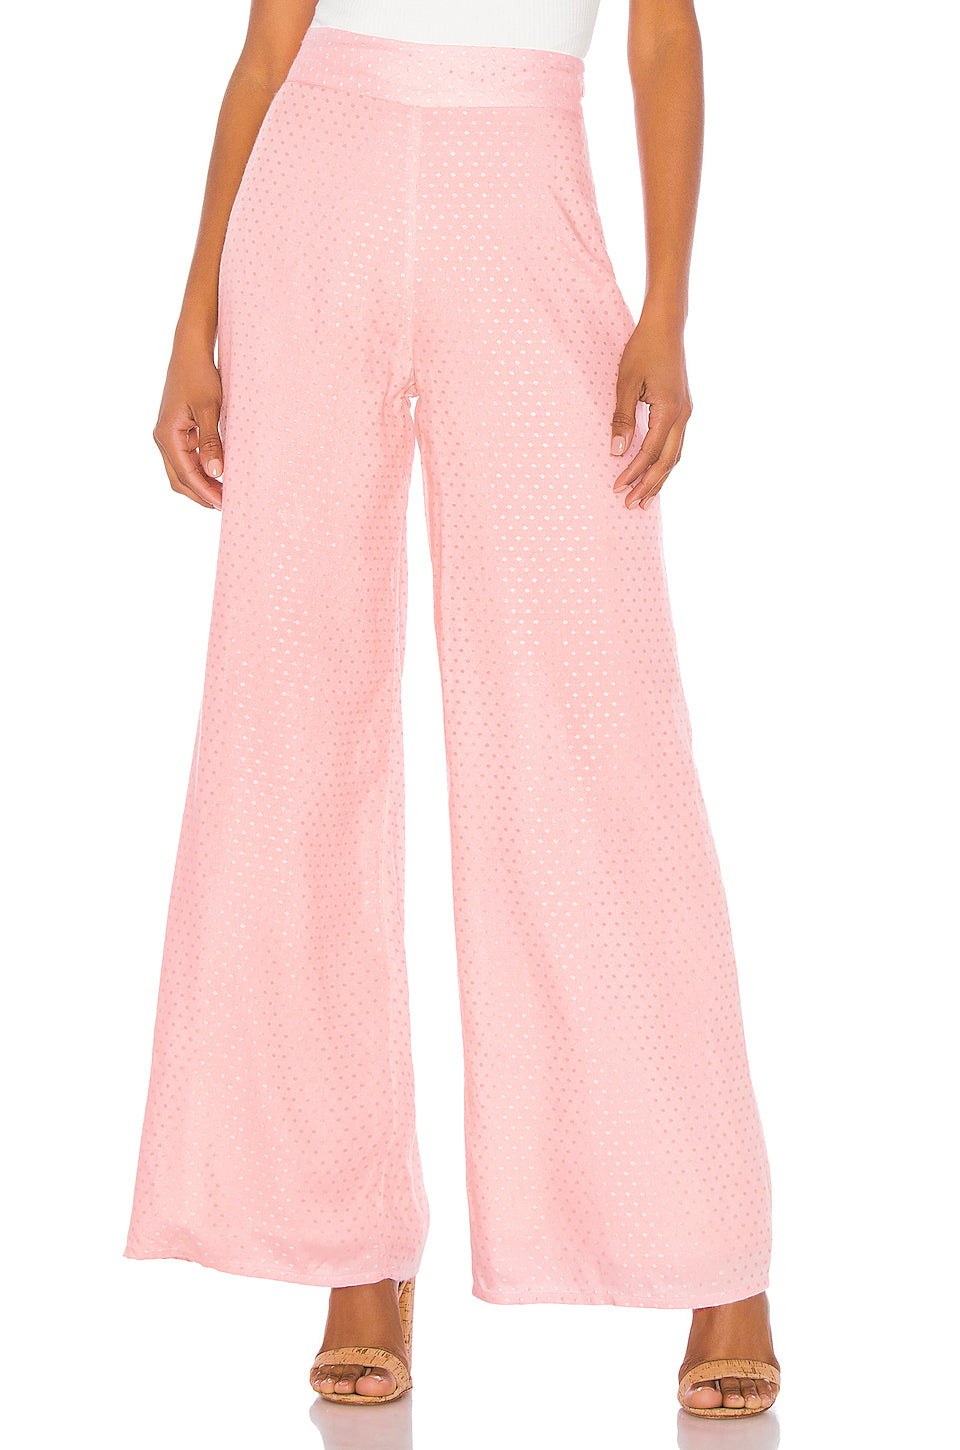 Marley Pant in BABY PINK